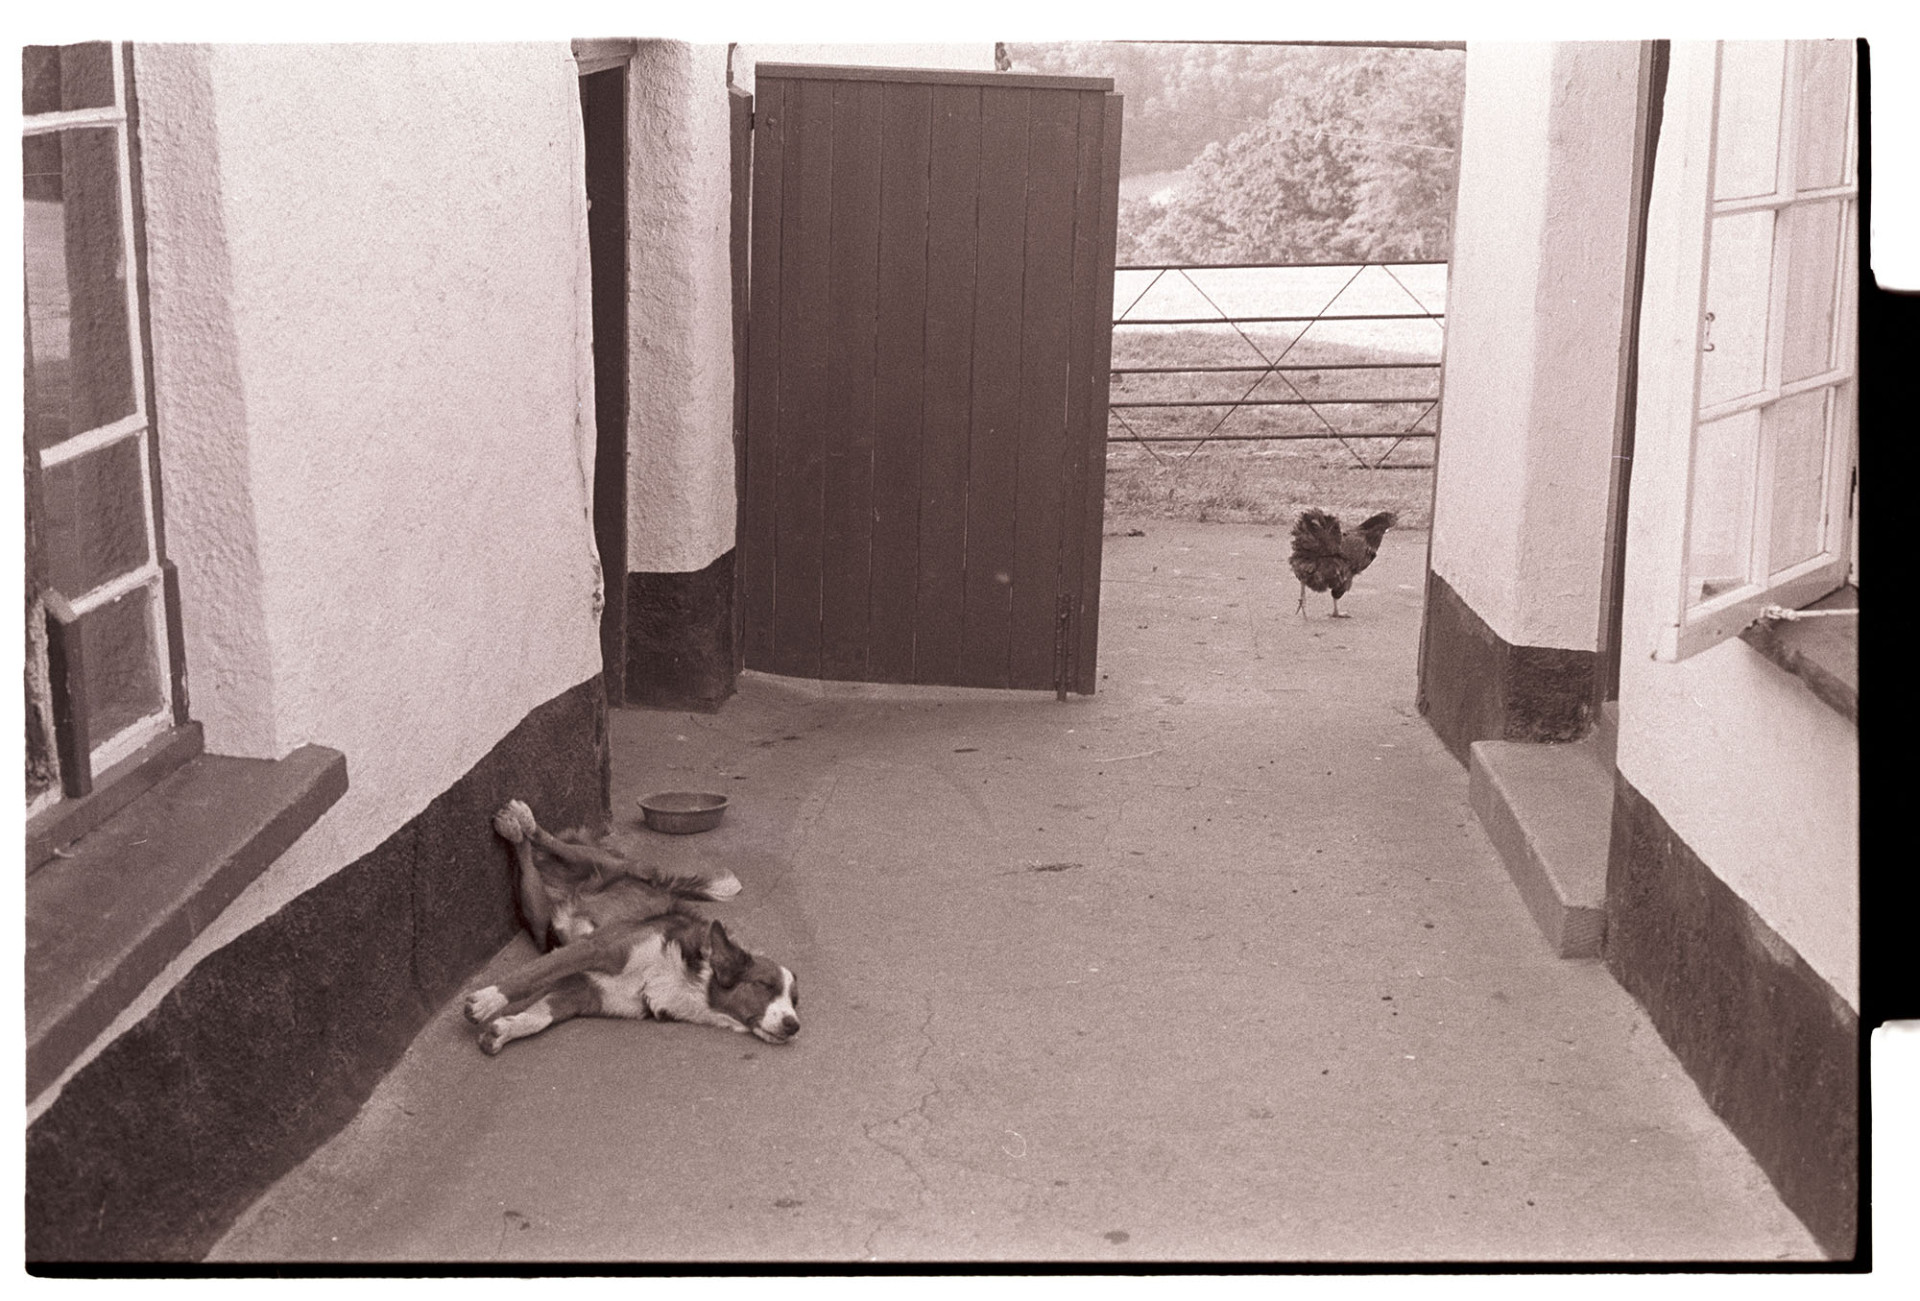 Dog resting in cob courtyard with chicken in background.
[A dog sleeping in the courtyard resting it's legs on the wall at Parsonage Farm, Iddesleigh. A chicken is walking around the farmhouse in the background.]